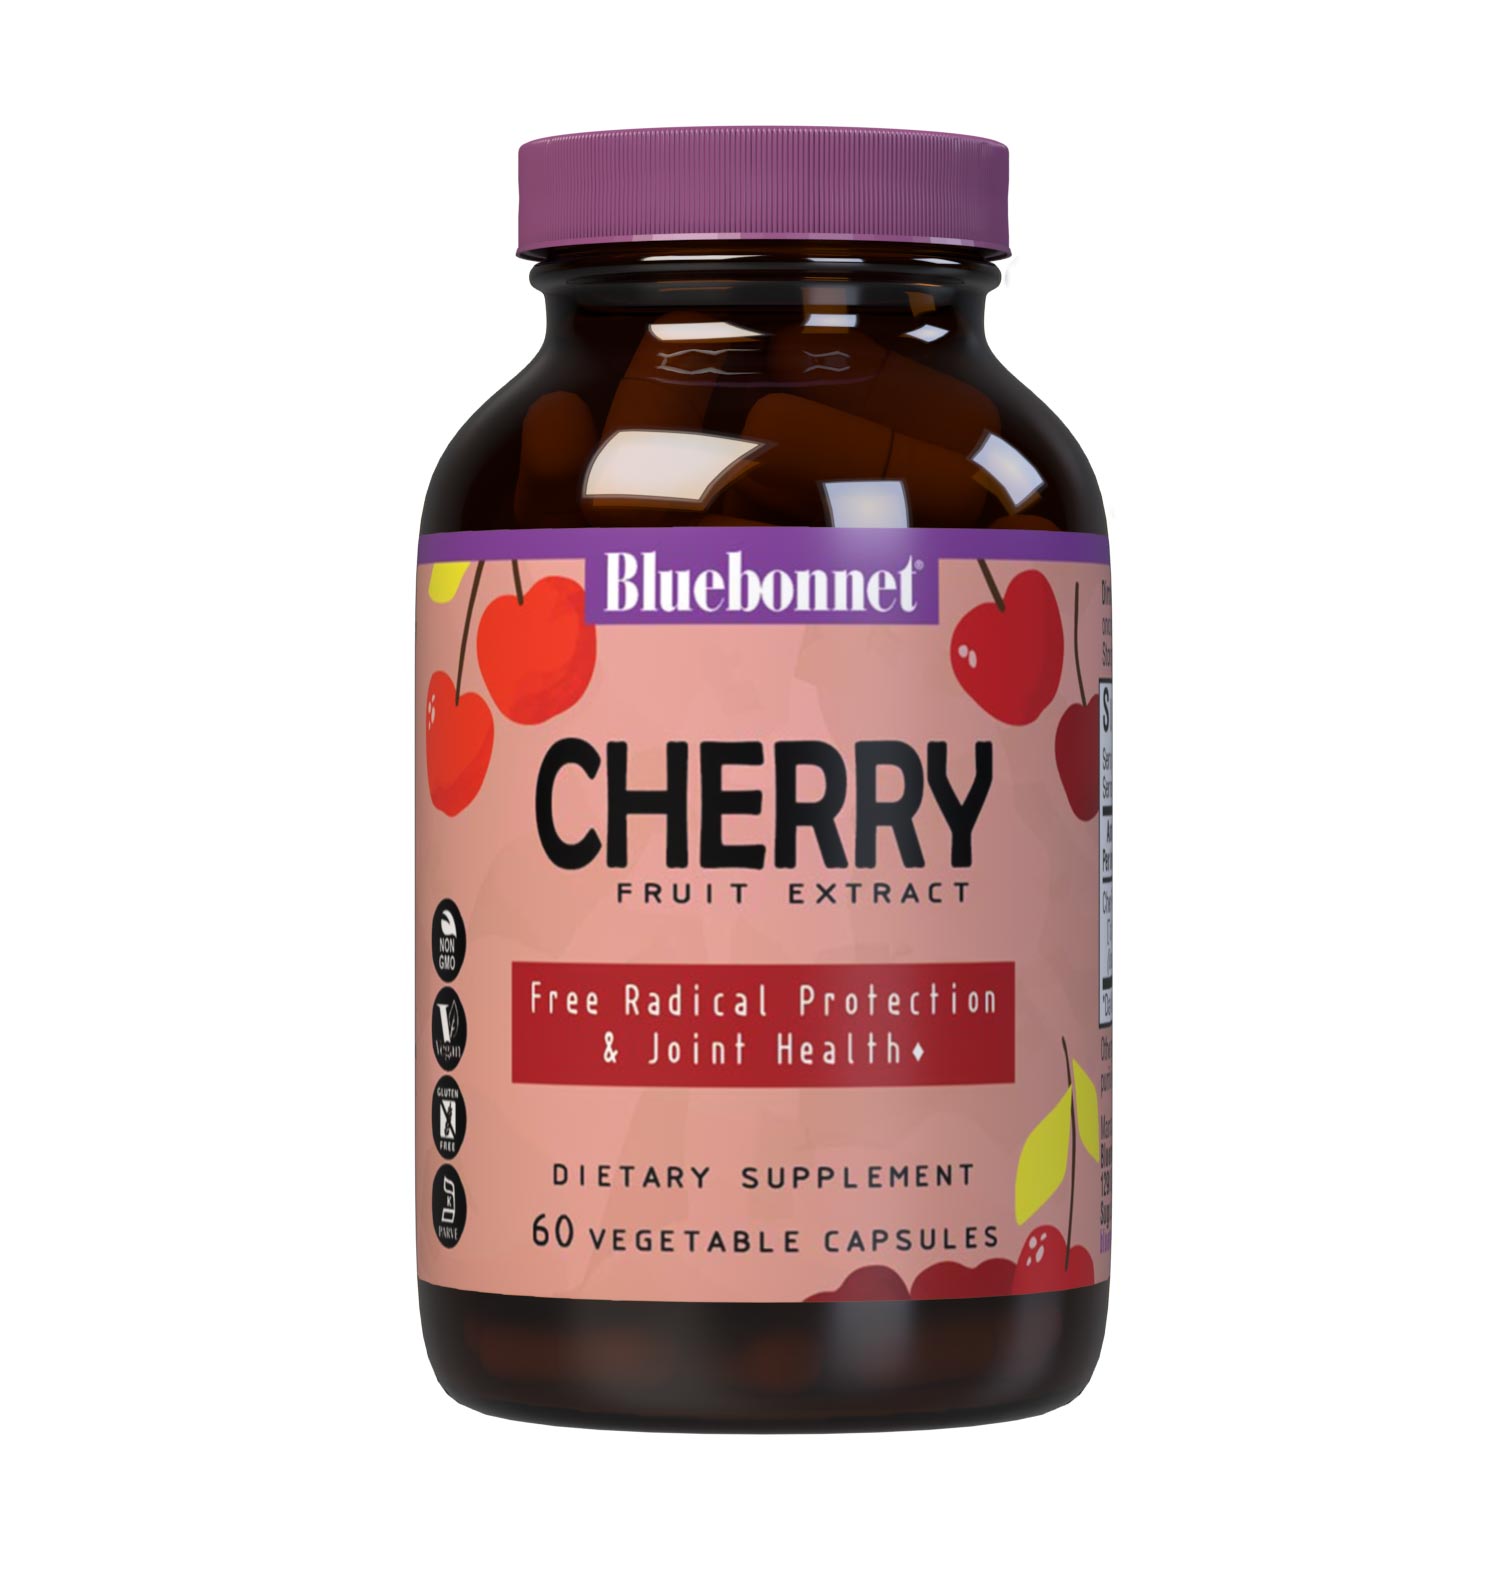 Bluebonnet's Cherry Fruit Extract 60 Vegetable Capsules are formulated with a combination of tart, sweet and black cherry to provide free radical protection and support joint health. #size_60 count